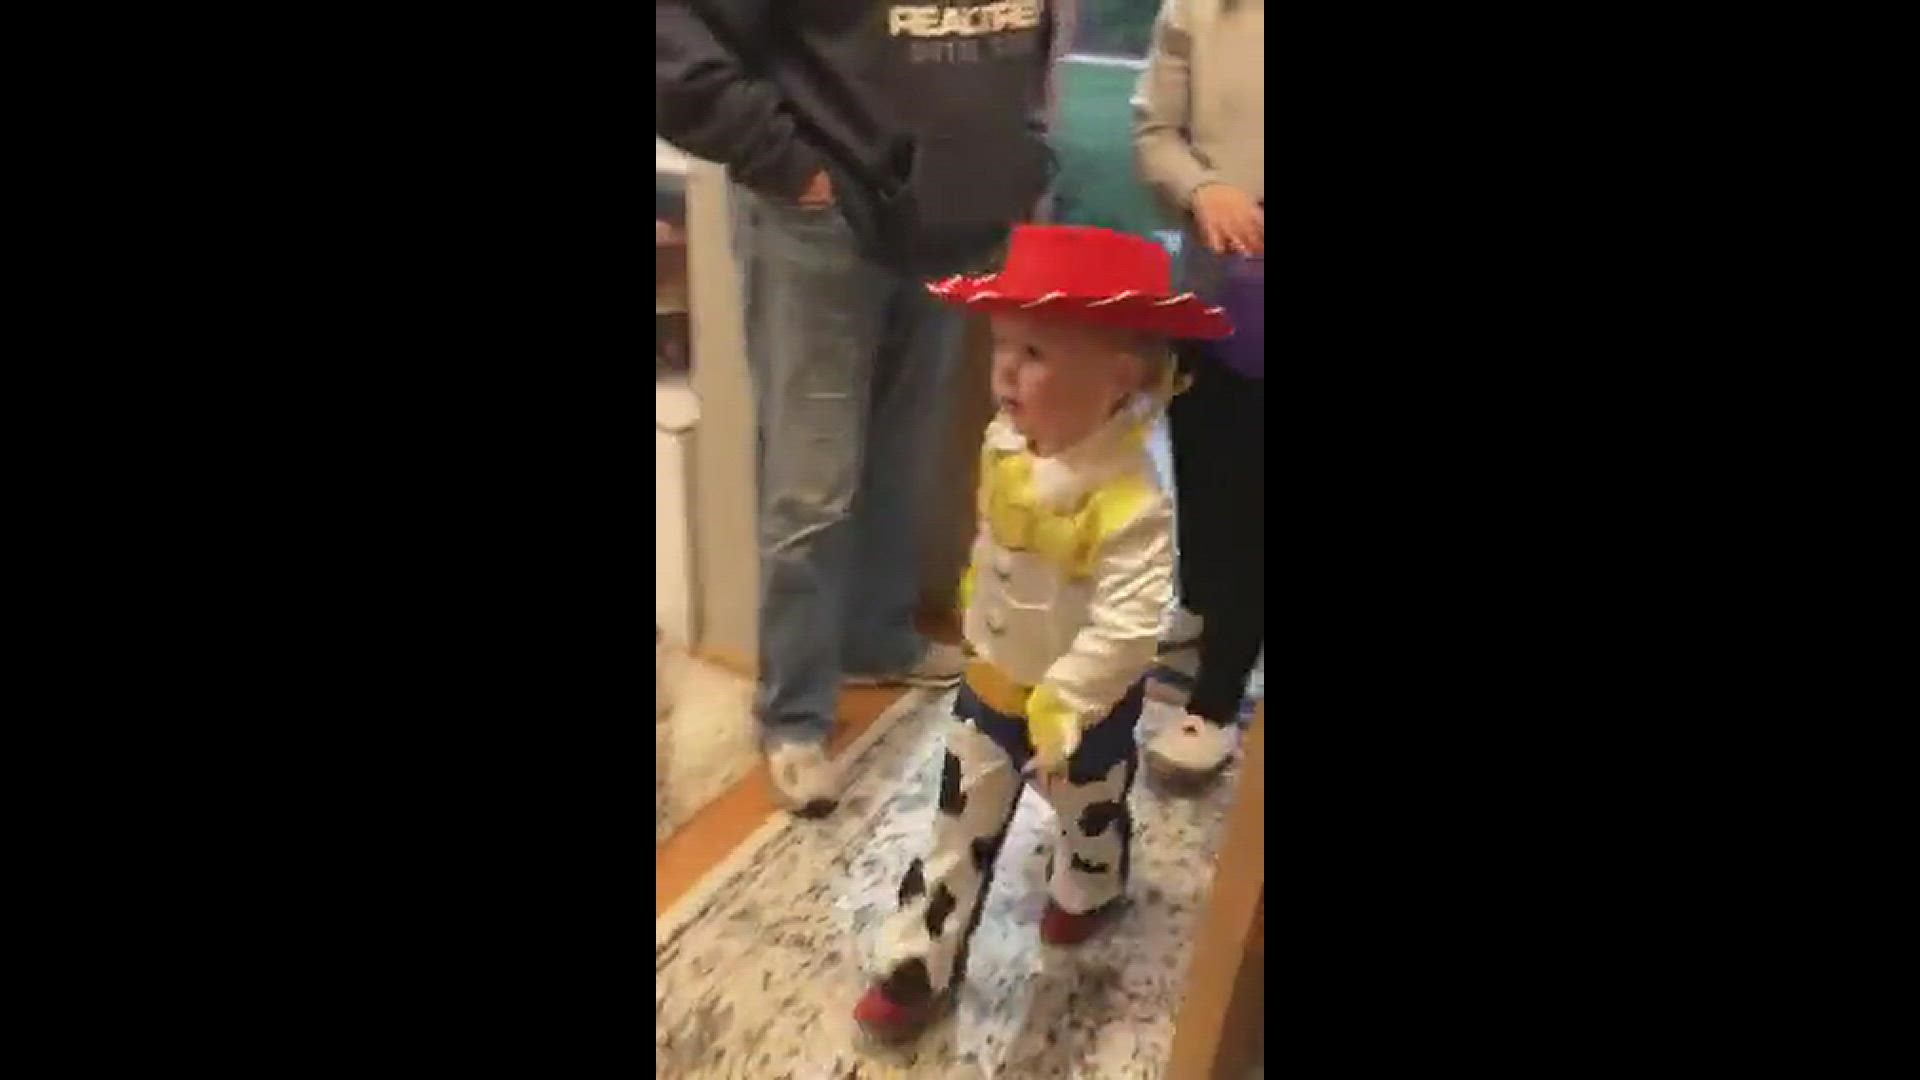 A Princeton, IL kid showing off a Toy Story costume.
Credit: Gramma Becky Terrill